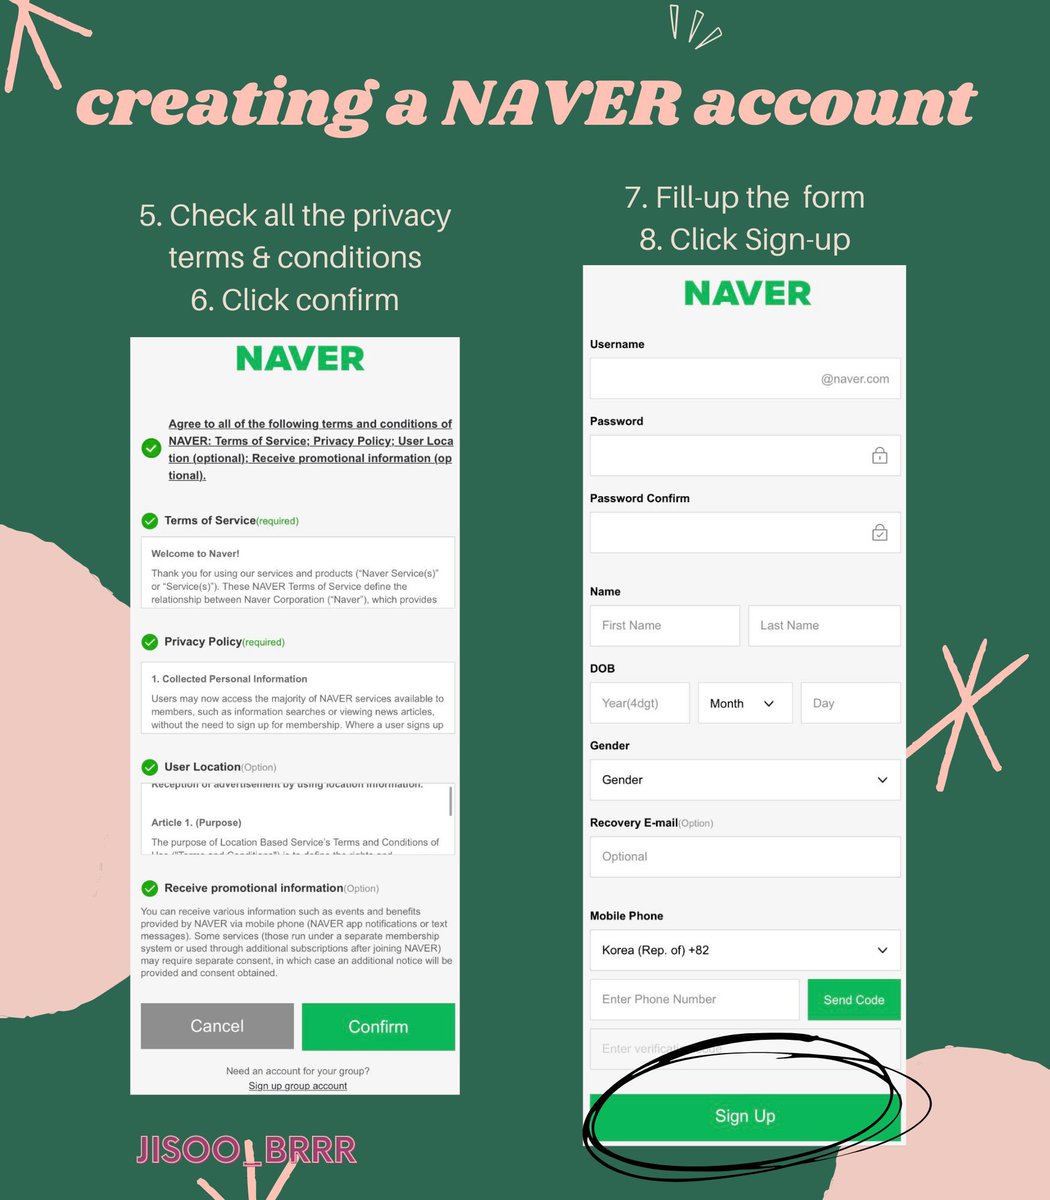 Please make sure to react to this type of articles is very important! For the ones that still don’t have Naver account, is very easy to create one 👇